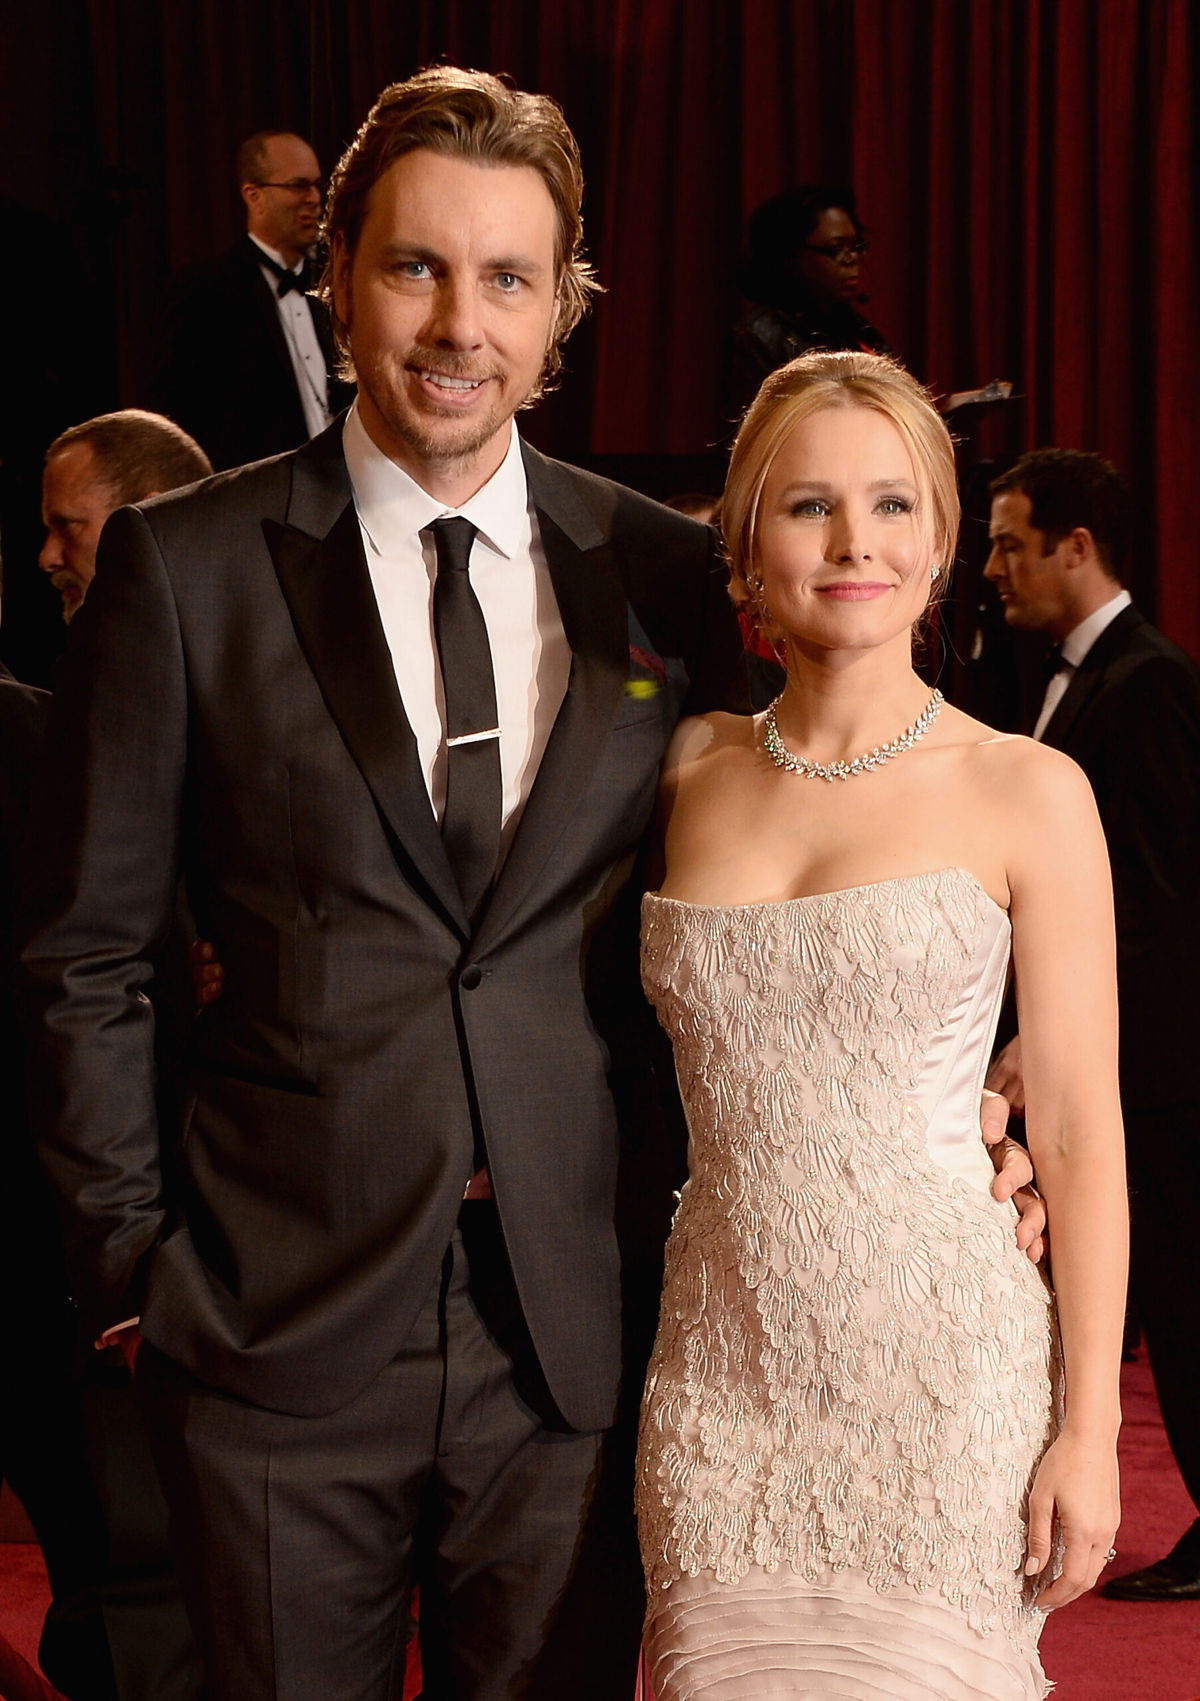 <i>Frazer Harrison/Getty Images/File</i><br/>Married couple Kristen Bell and Dax Shepard were involved in how often to bath your children conversation last year and now they have weighed in on the sleeping habits of their family.